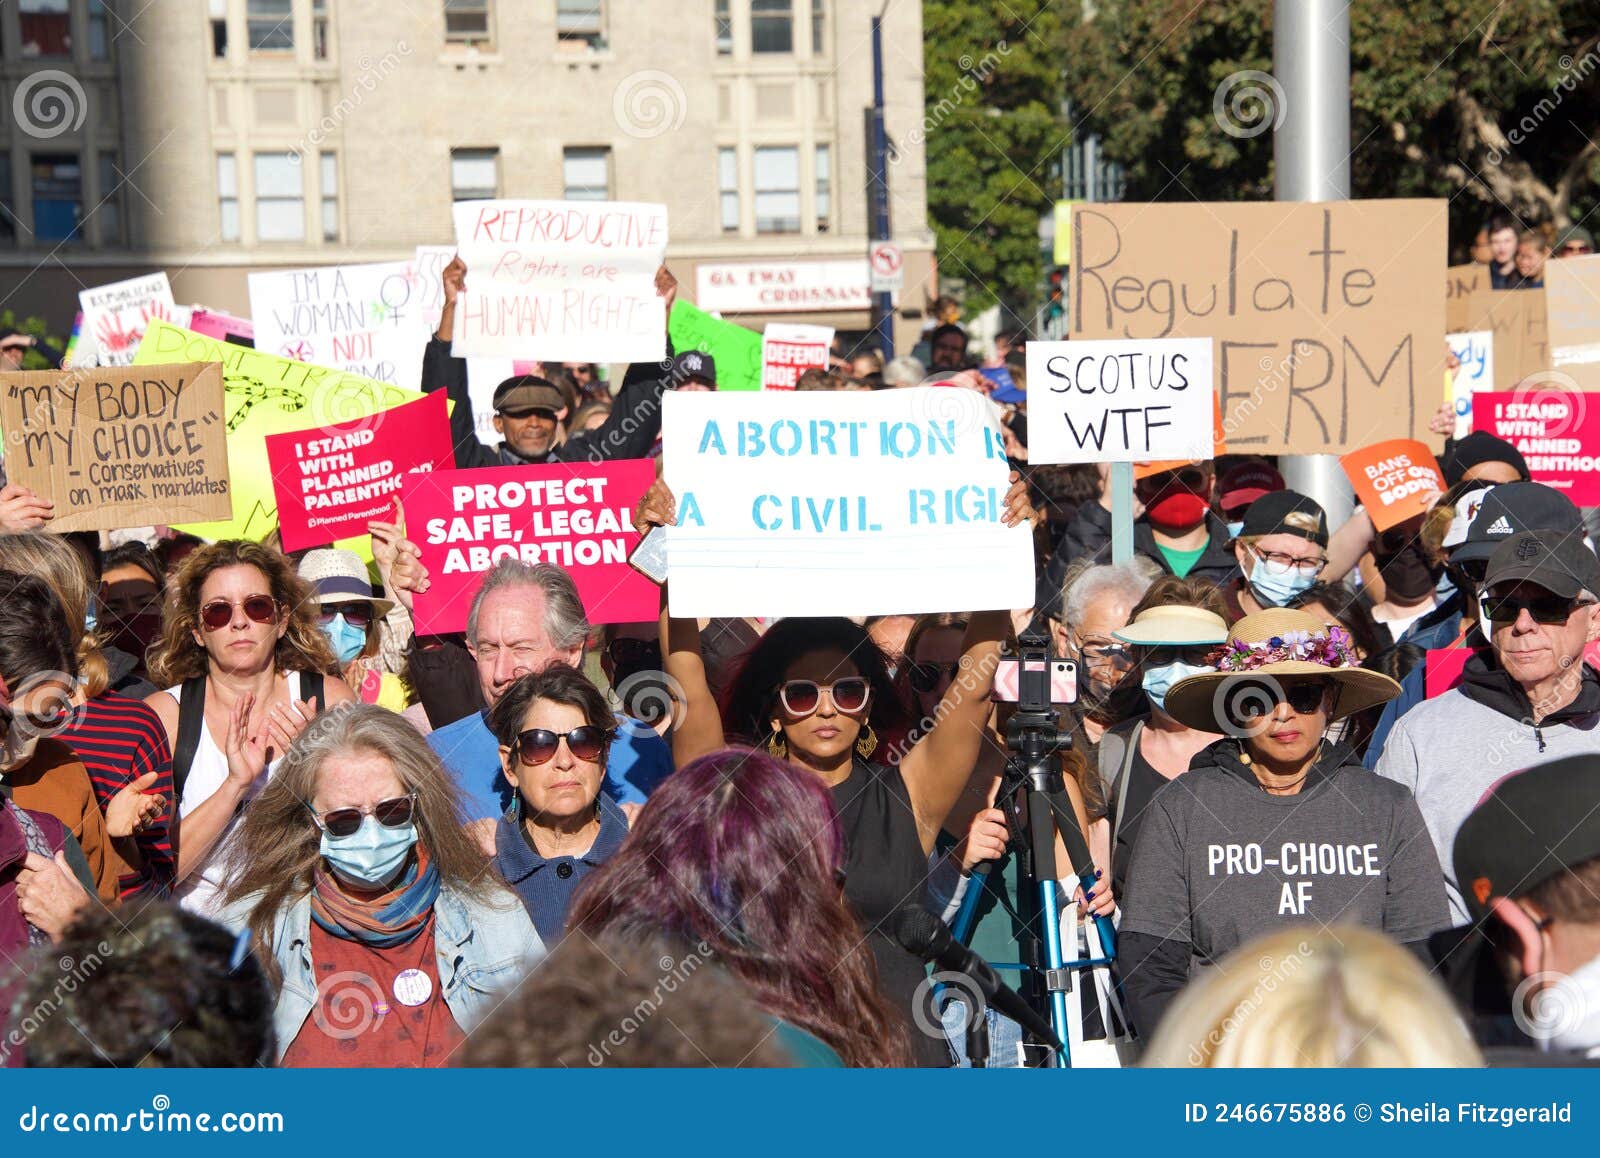 Womenâ€™s Rights Protest In San Francisco Ca After Scotus Leak Editorial Photo Image Of